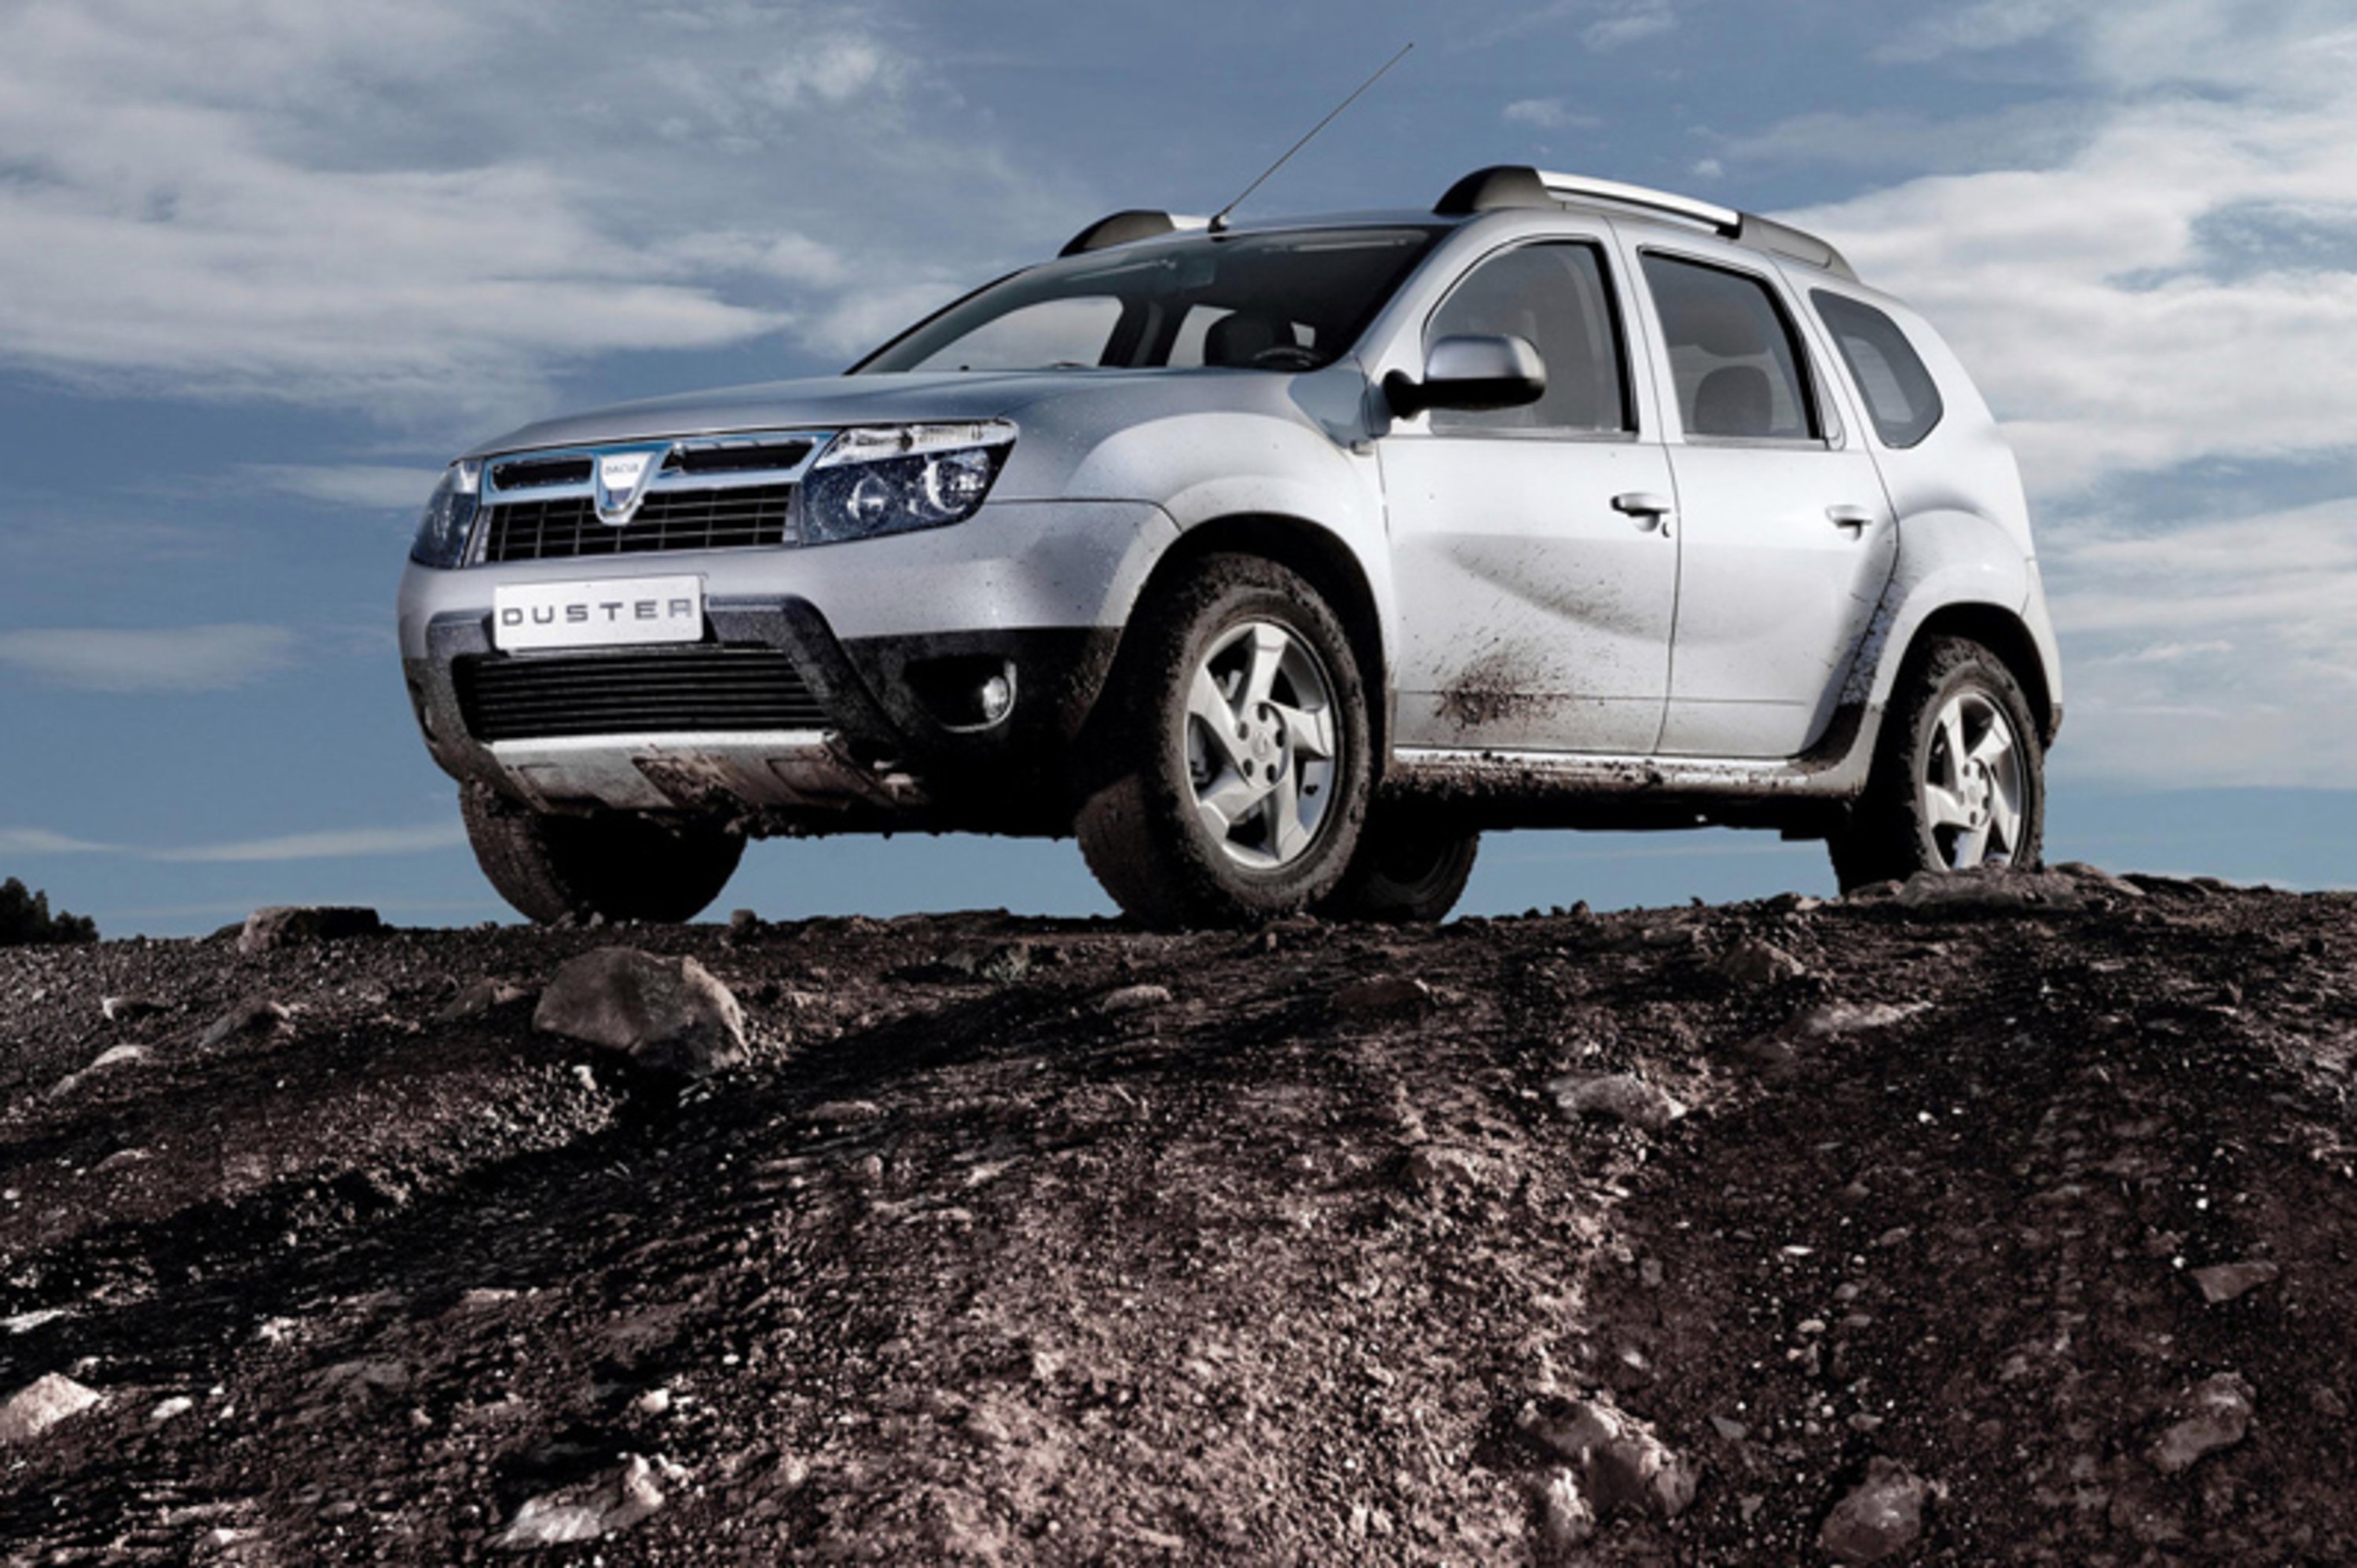 Dacia Duster 1.5 dCi 110CV S&S 4x2 Serie Speciale Brave2 N1